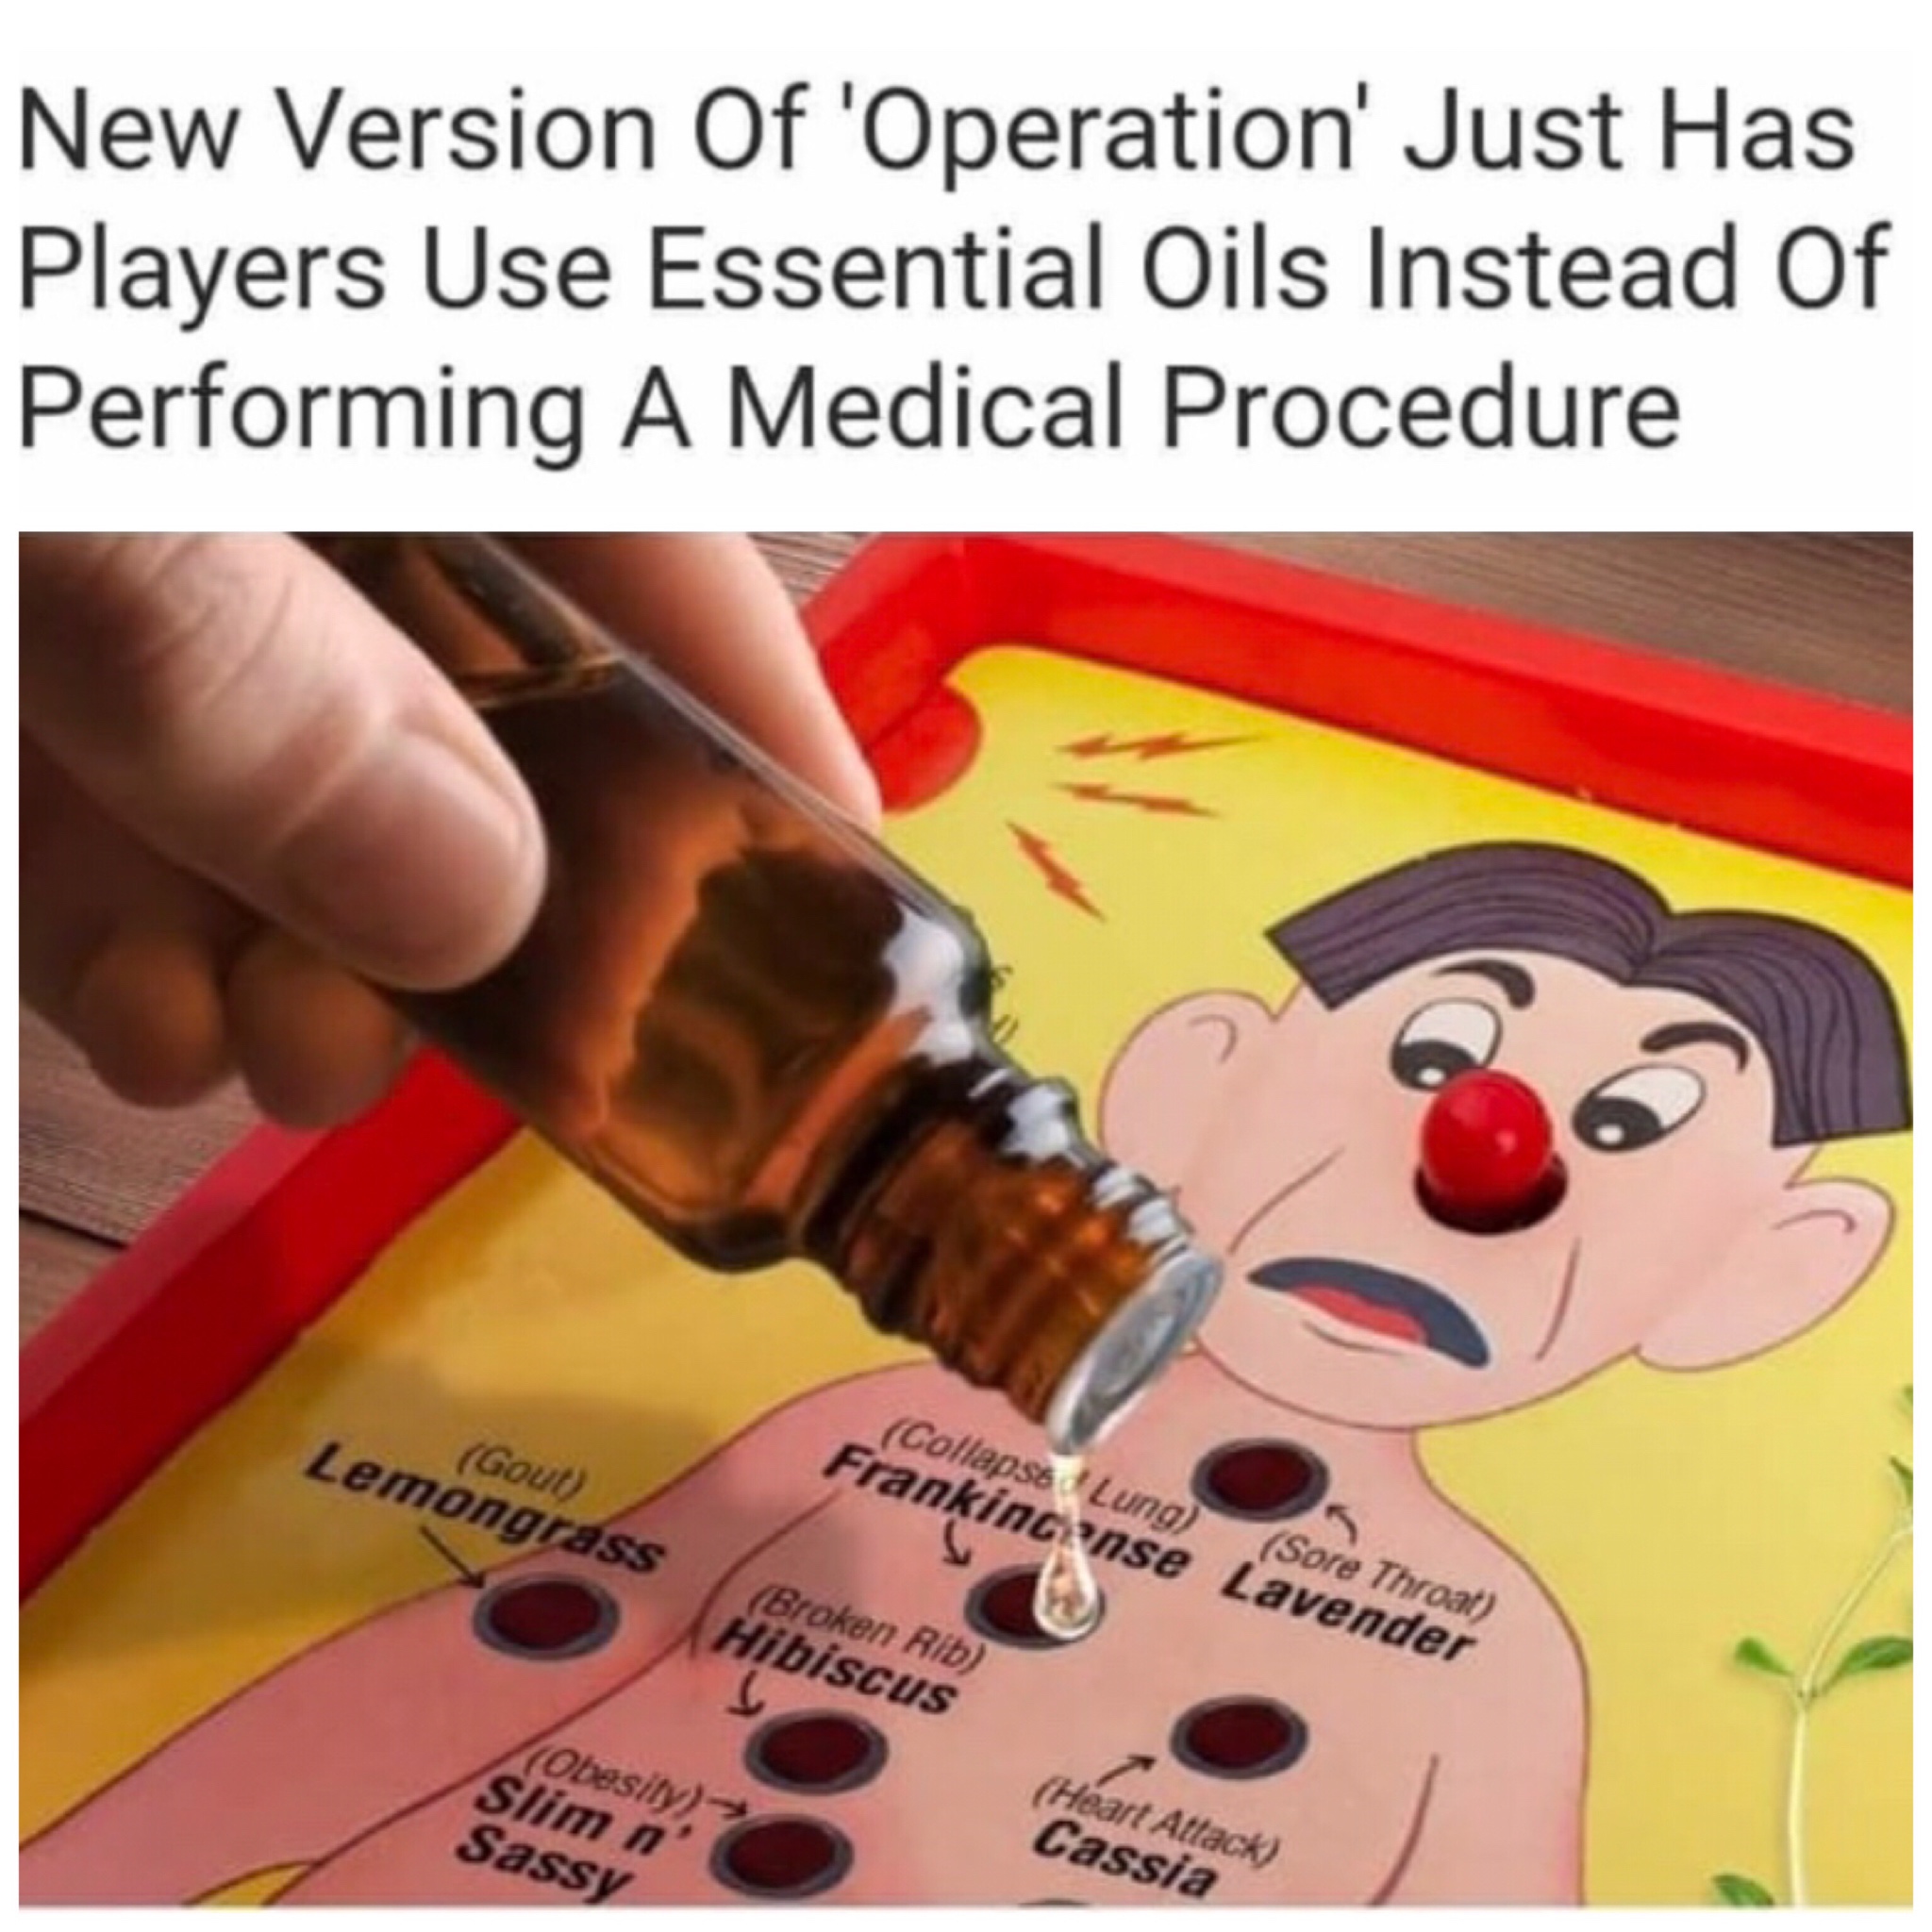 medical meme - new version of operation essential oils - New Version Of 'Operation' Just Has Players Use Essential Oils Instead of Performing A Medical Procedure Lemong Goud Cose Luna Franking inse Lavender B Rid Hibiscus